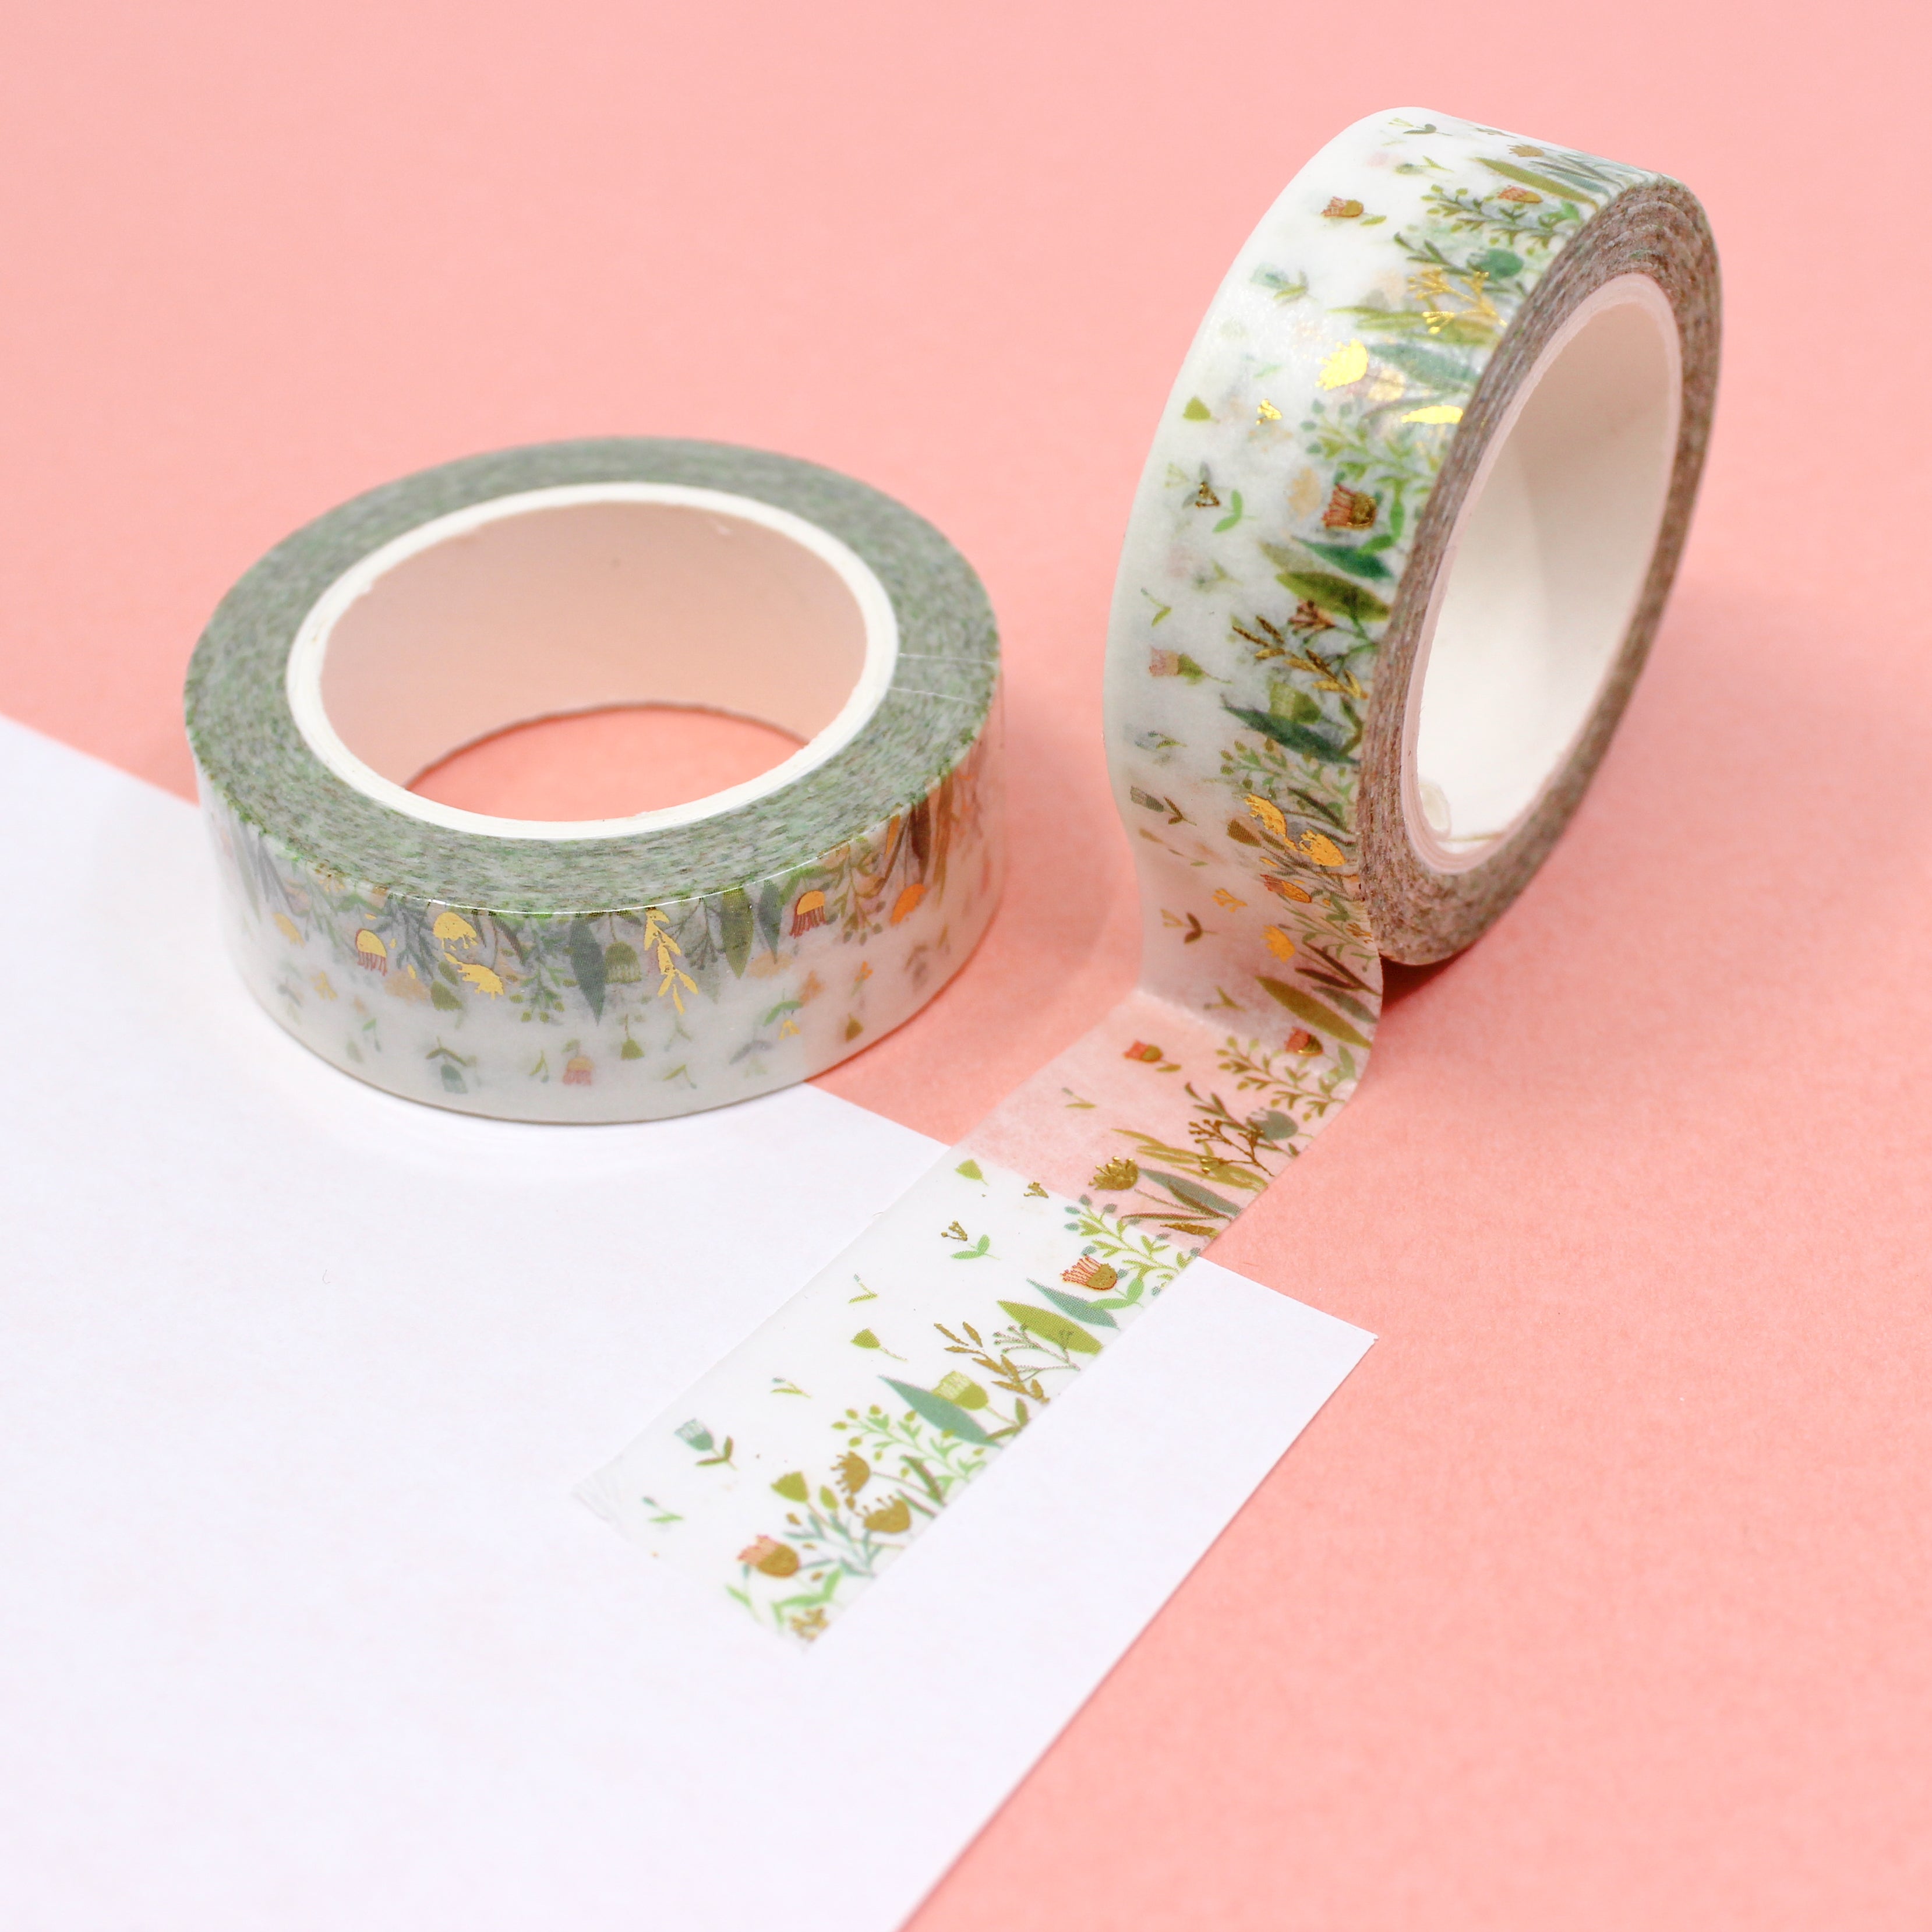 This is a gold foil floral collections pattern washi tape from BBB Supplies Craft Shop